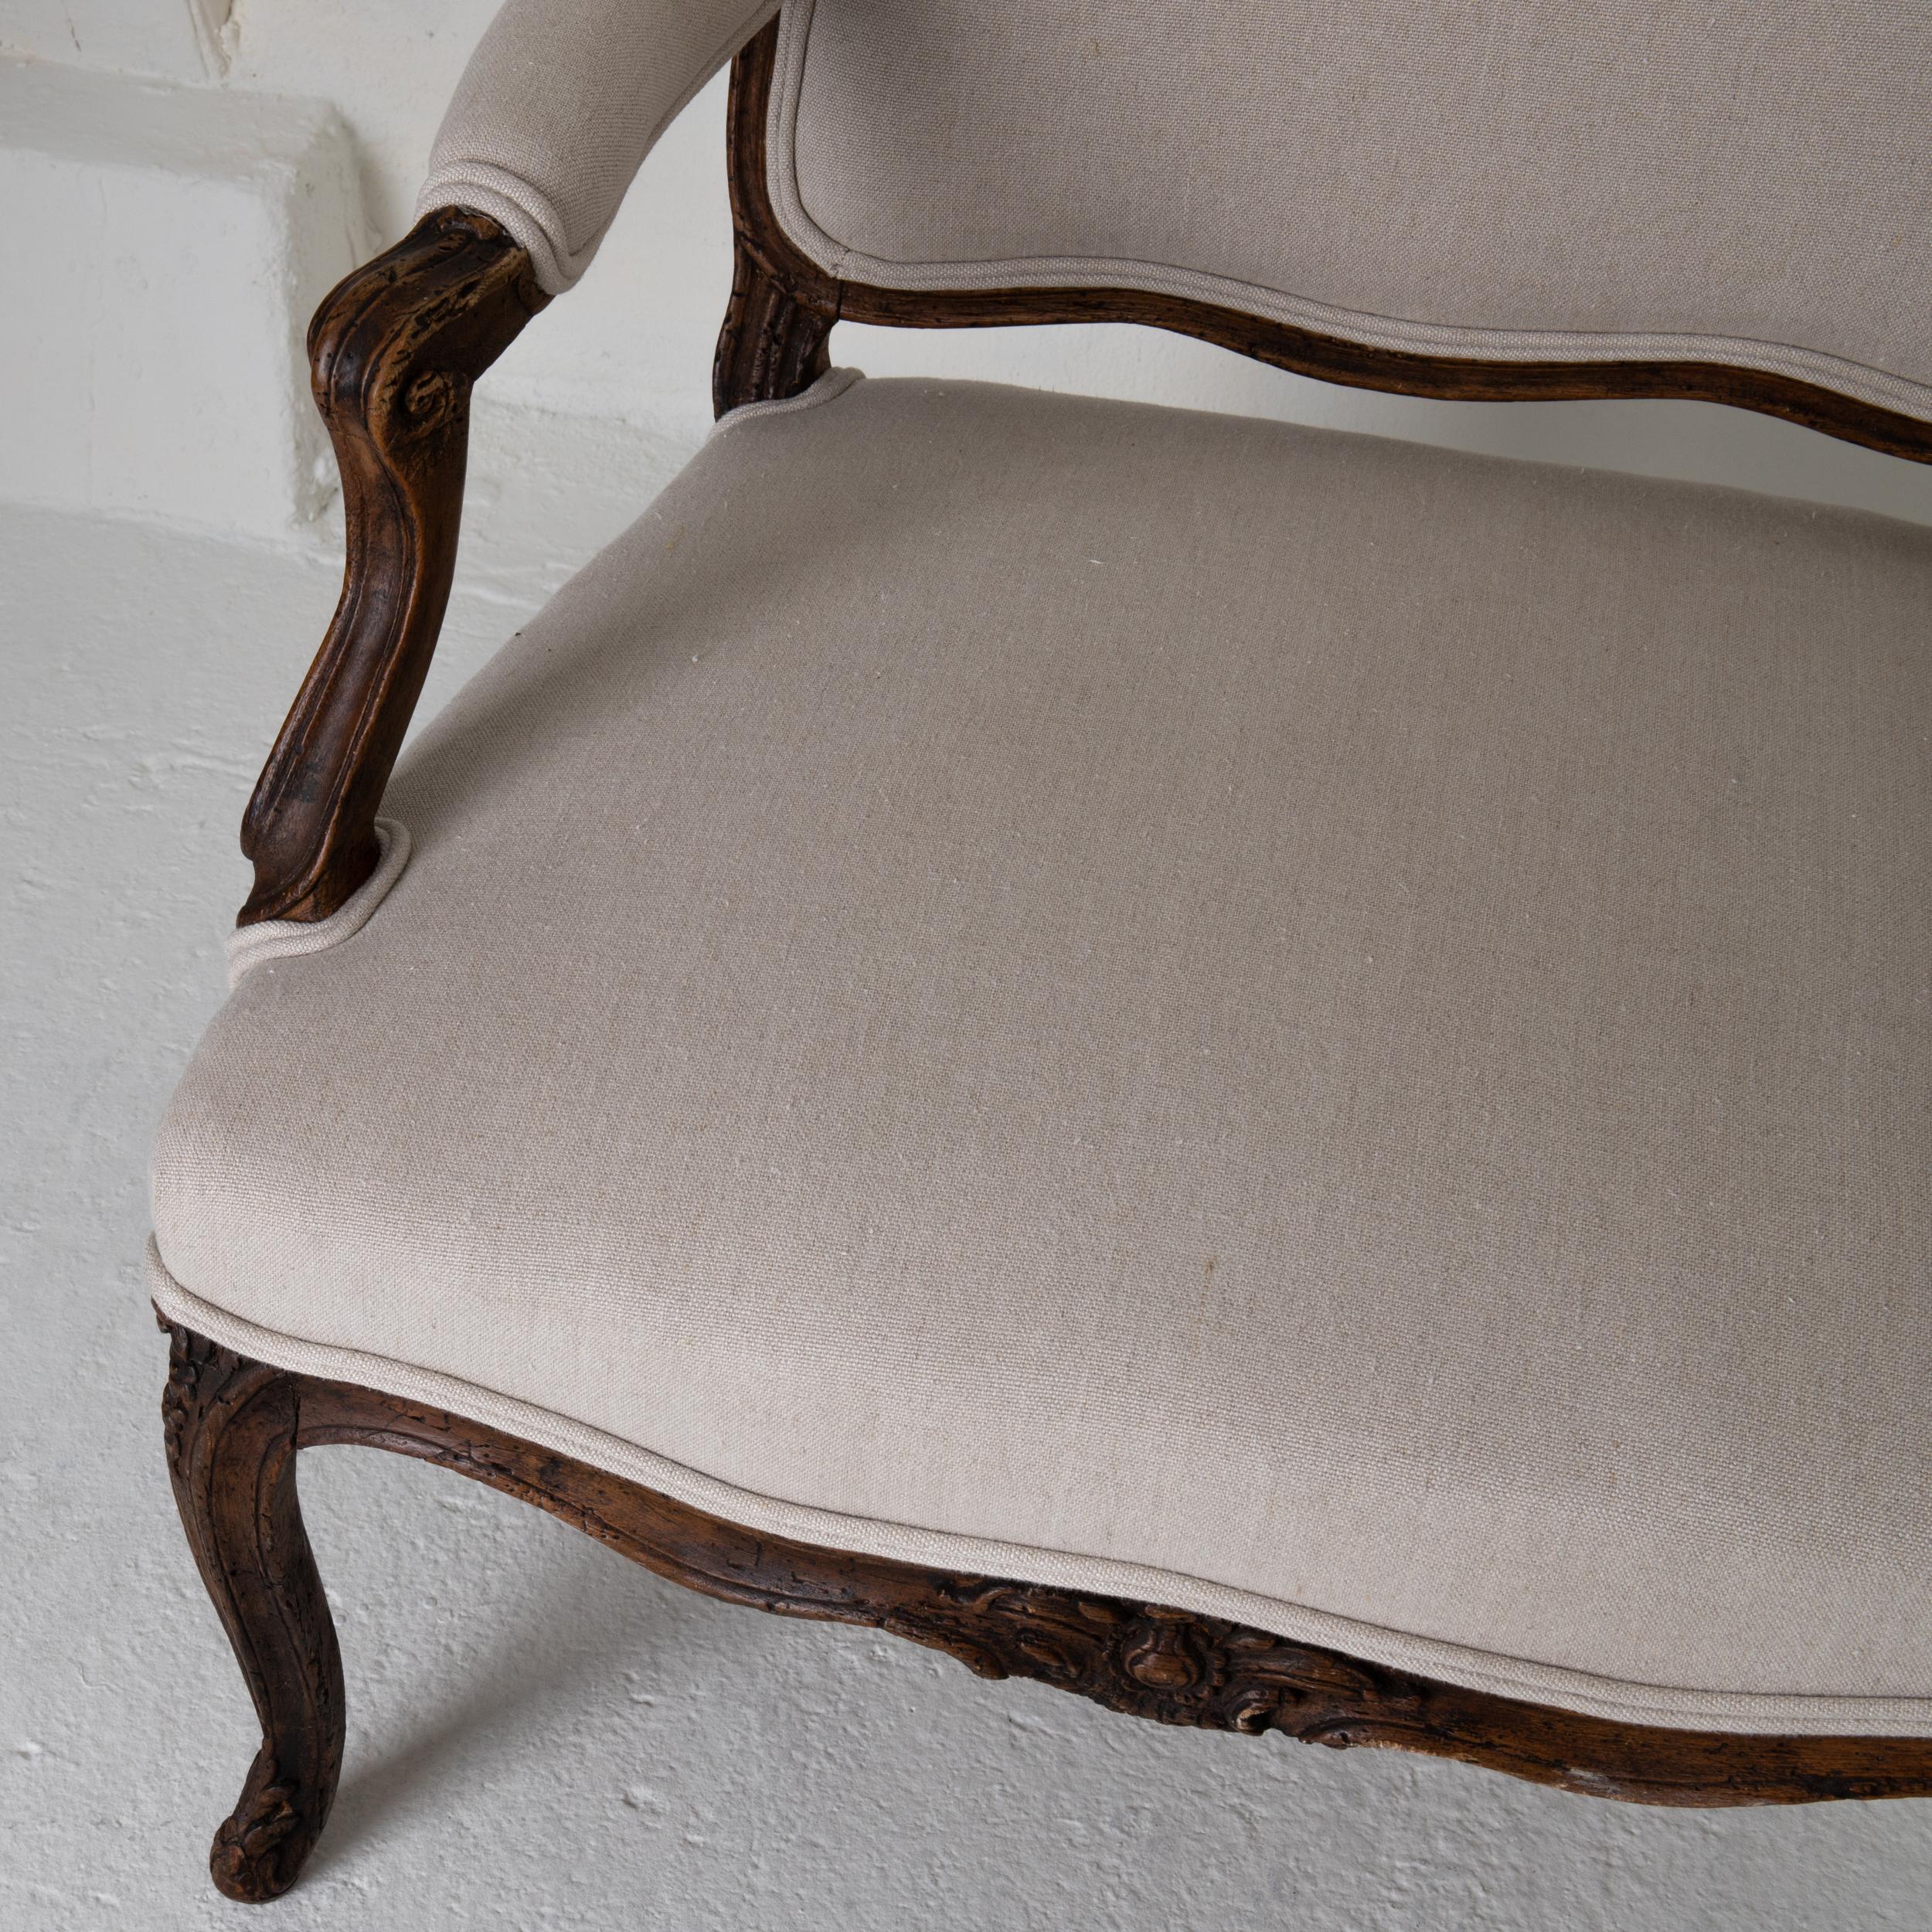 Armchair Swedish Rococo brown beige linen, Sweden. An armchair made during the Rococo period 1730-1750 in France. Carved oak frame in a dark brown. Upholstered back, seat and armrests in a neutral colored linen. Curved and carved S-shaped legs.